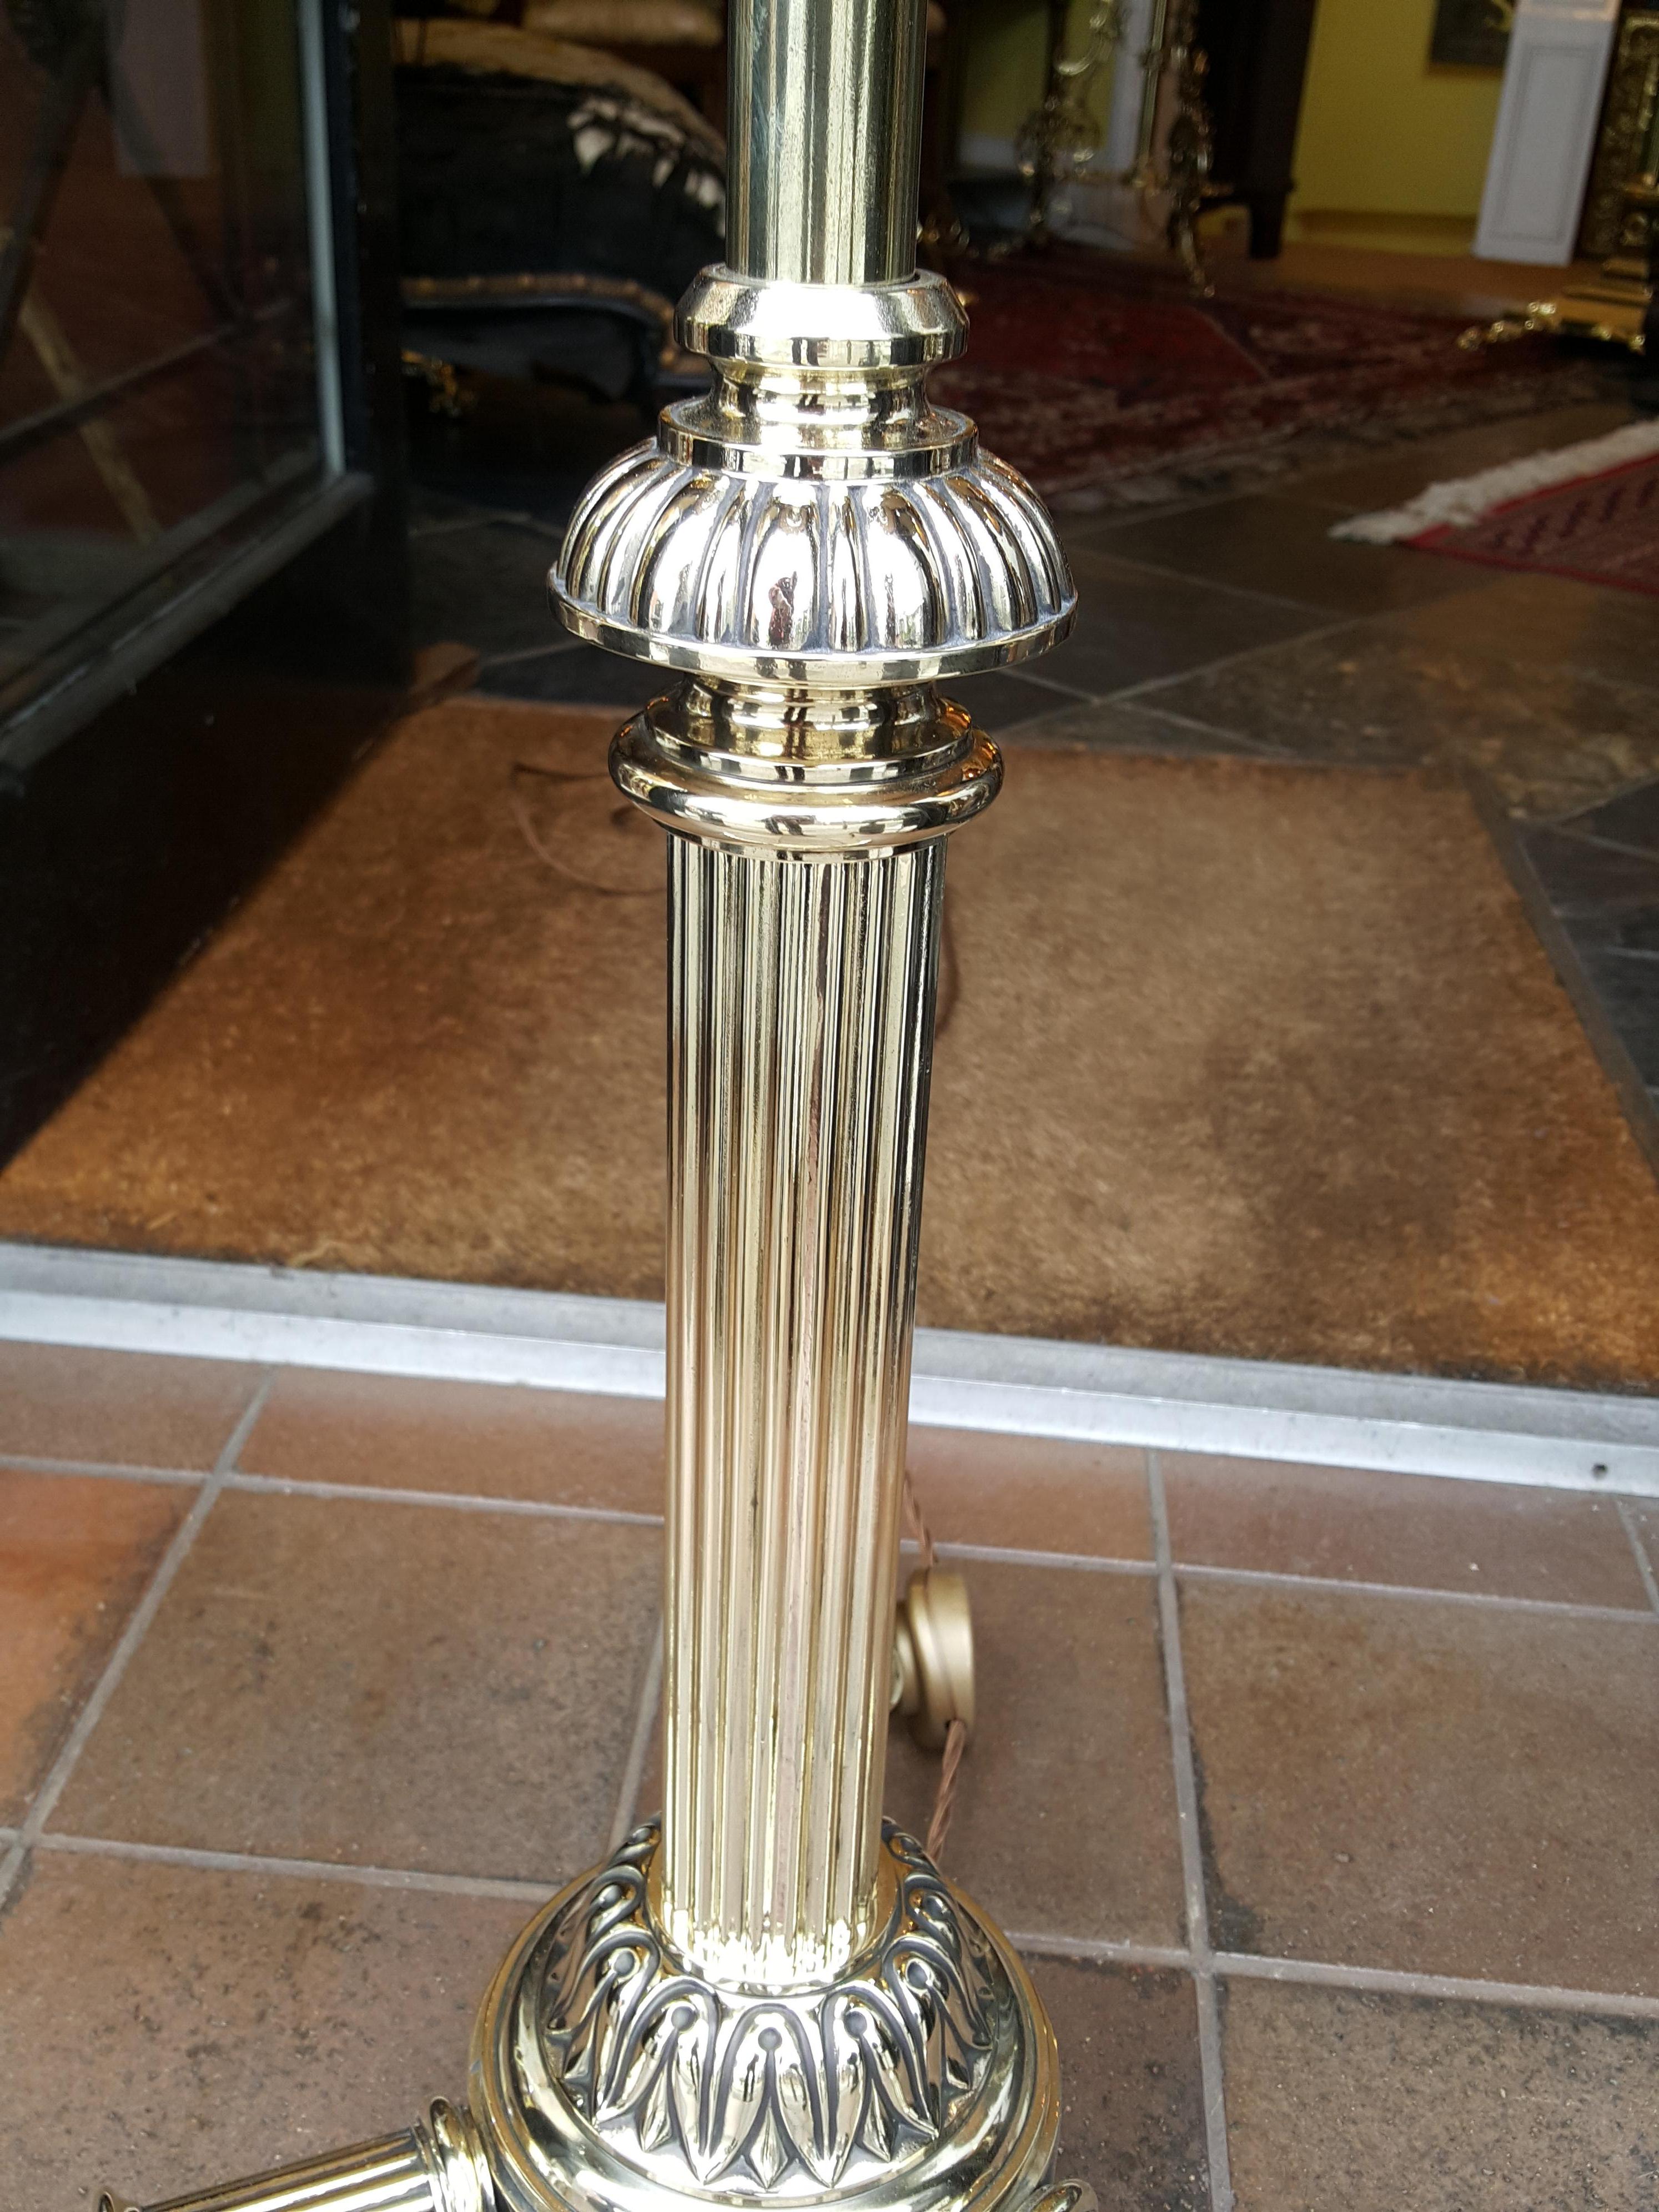 Early 20th Century Brass Standard Lamp In Good Condition For Sale In Altrincham, Cheshire